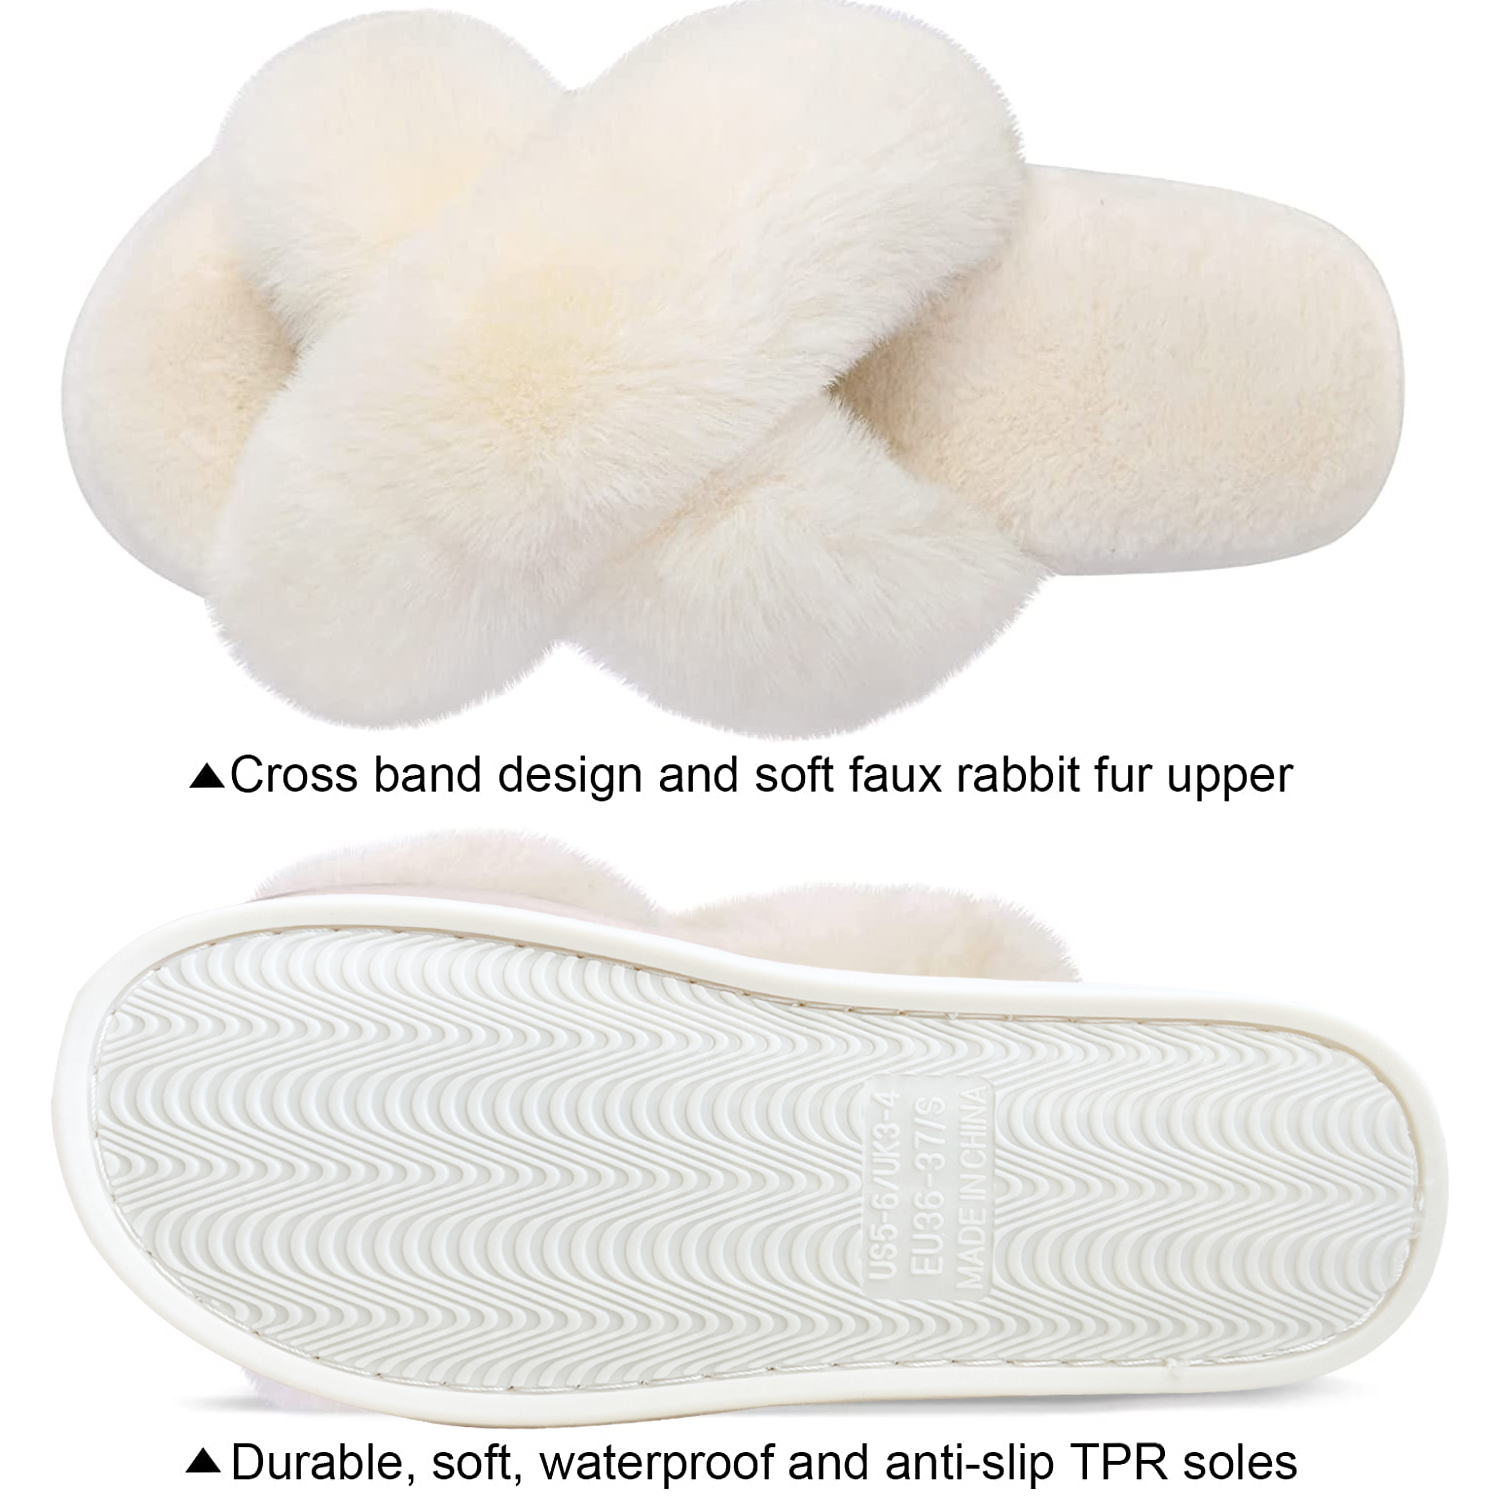 Women's Cross Band Slippers Soft Plush Furry Cozy Open Toe House Shoes Indoor Outdoor Faux Rabbit Fur Warm Comfy Slip On Breathable - image 5 of 7